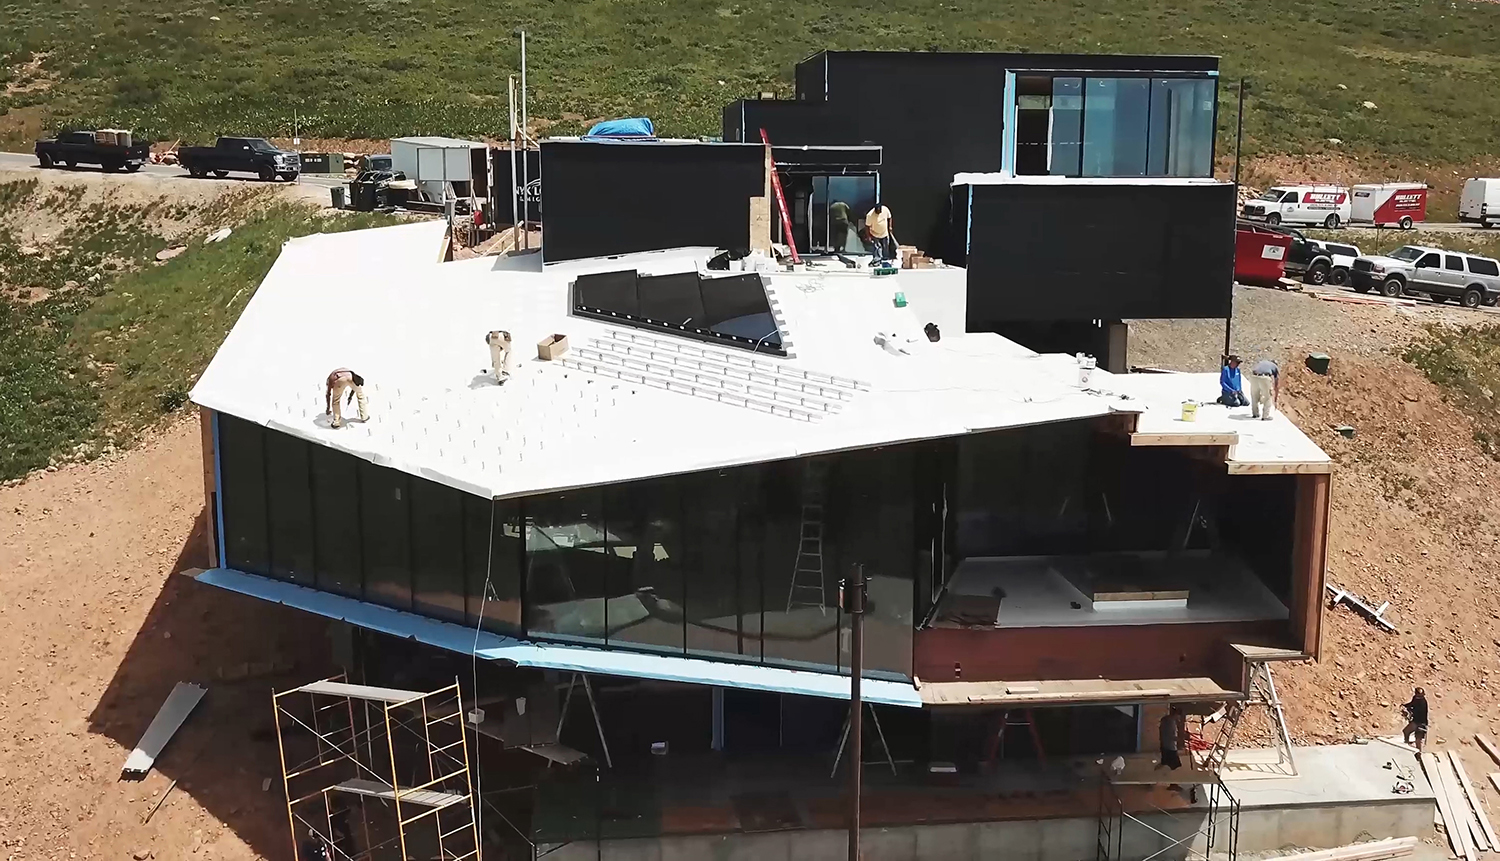 Aerial image of the Dark Chalet under construction